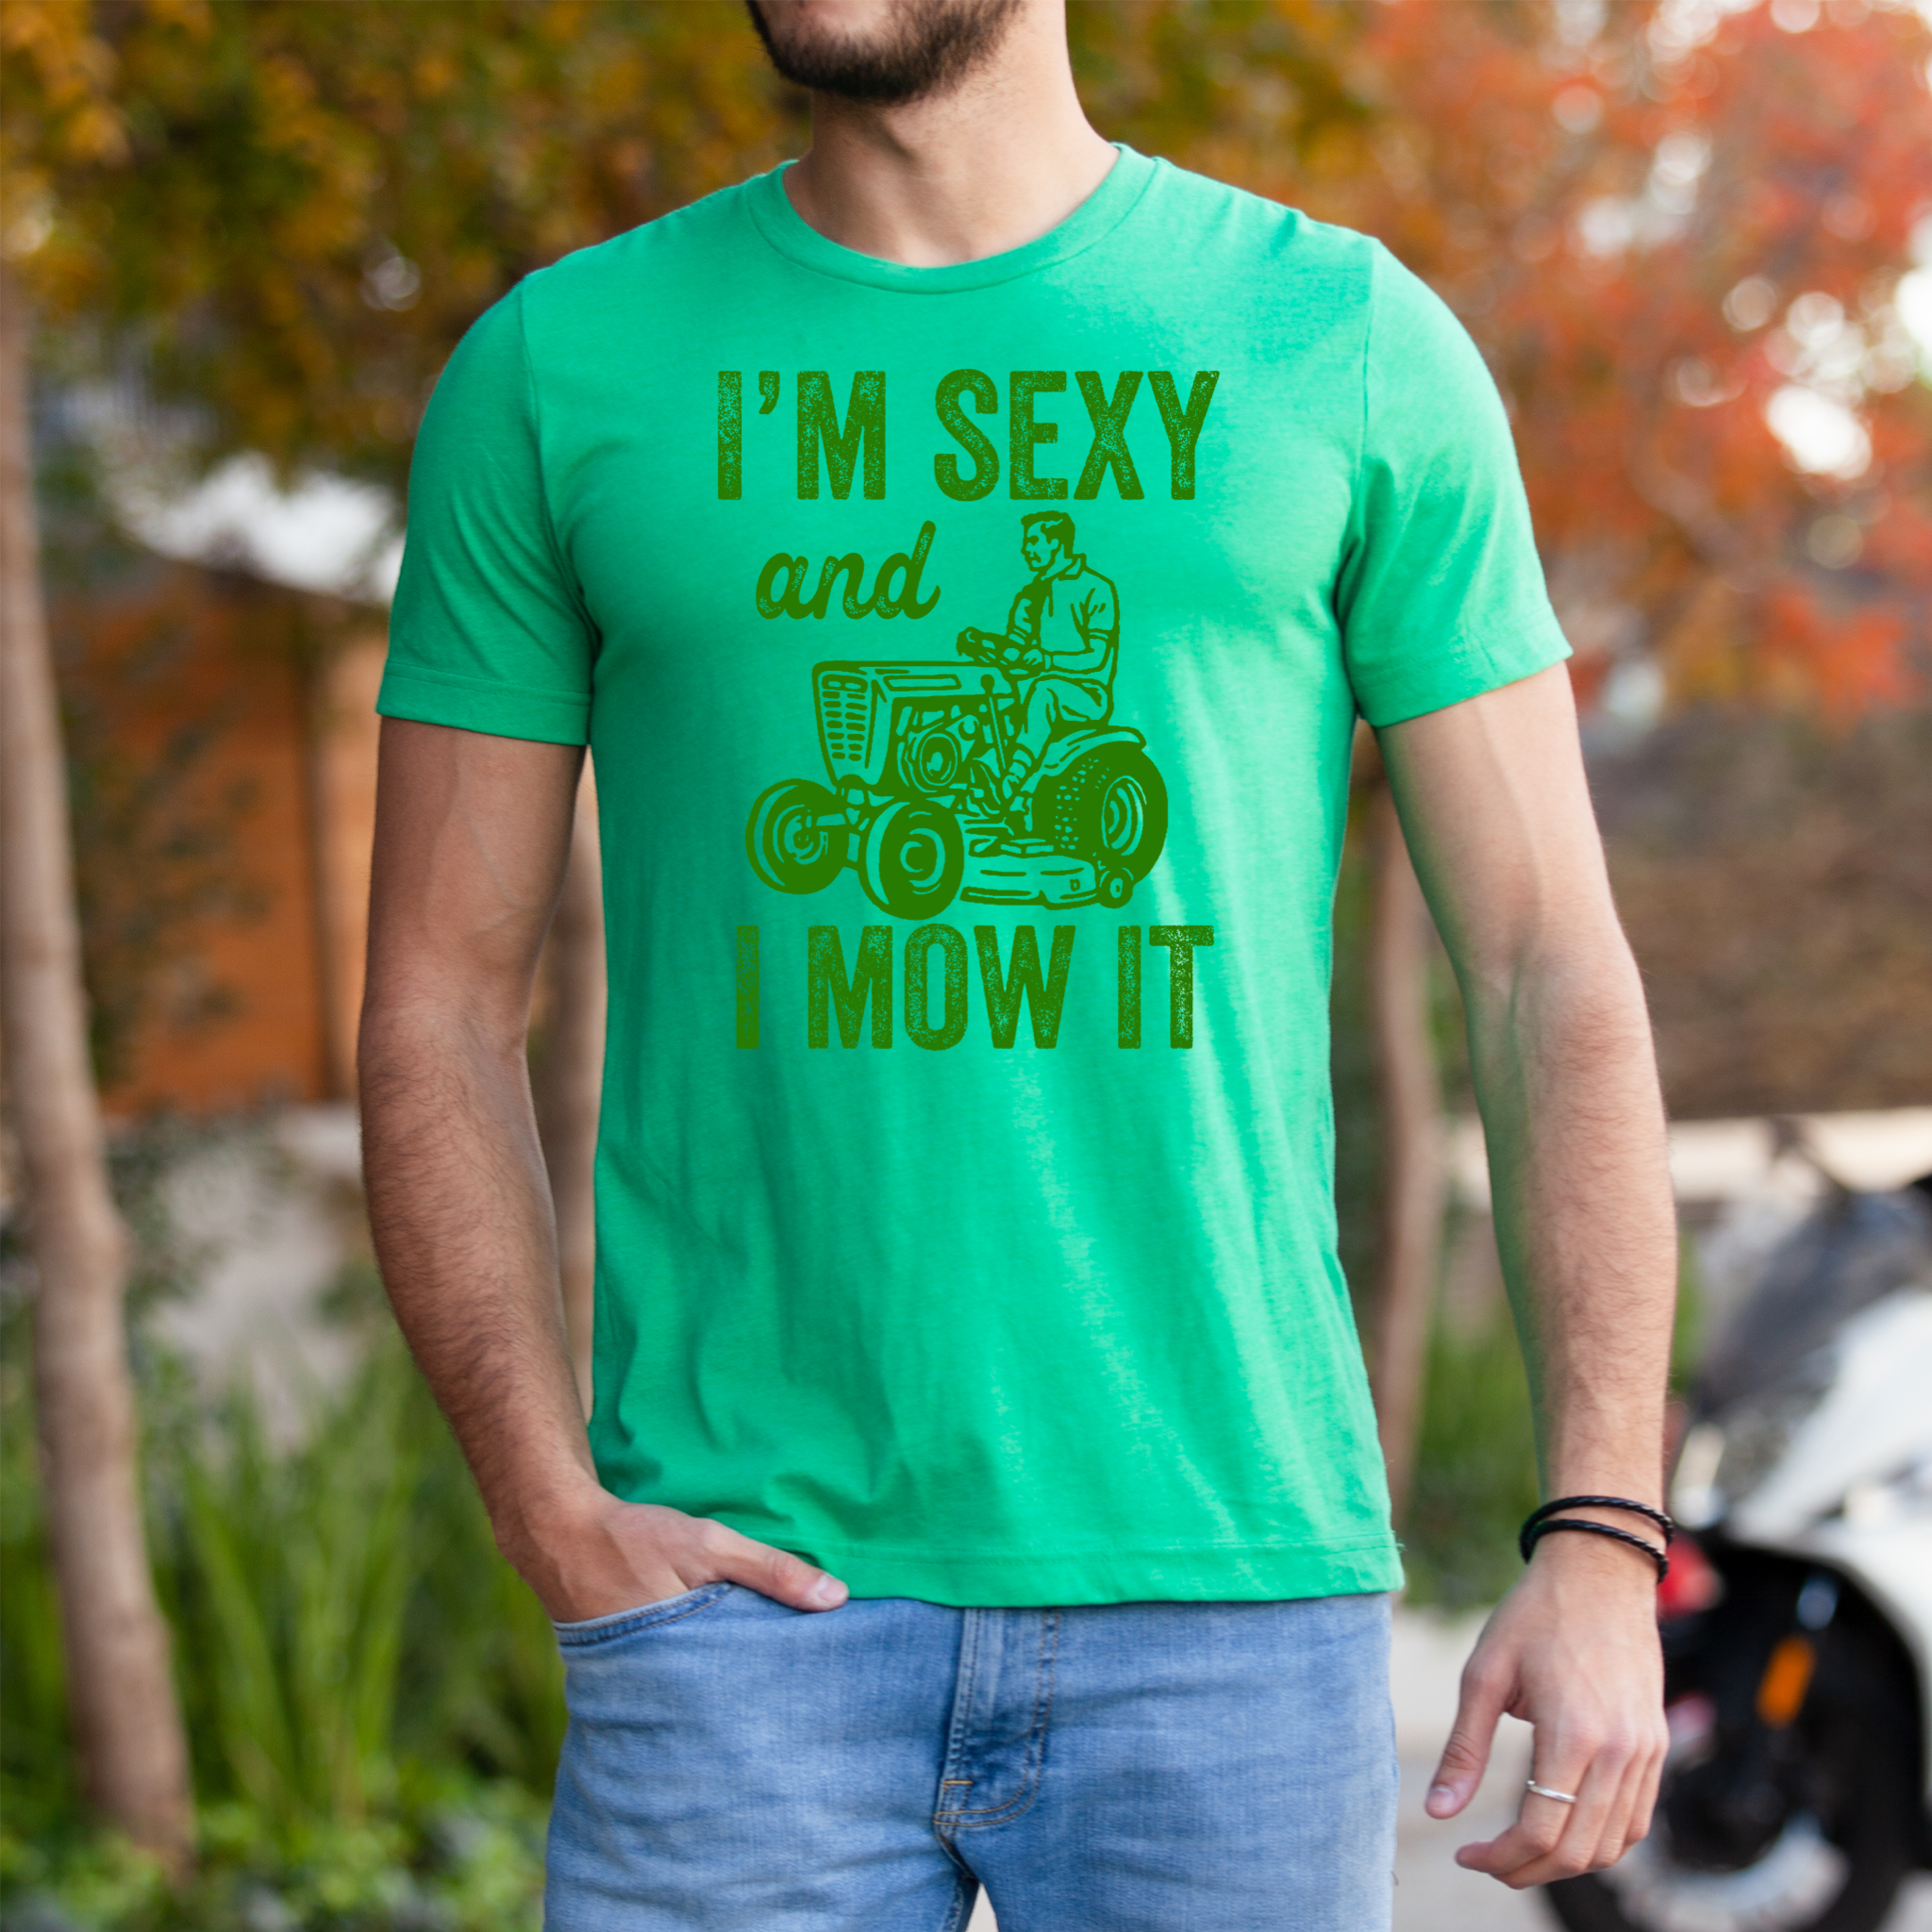 I'M SEXY AND I MOW IT T-SHIRT